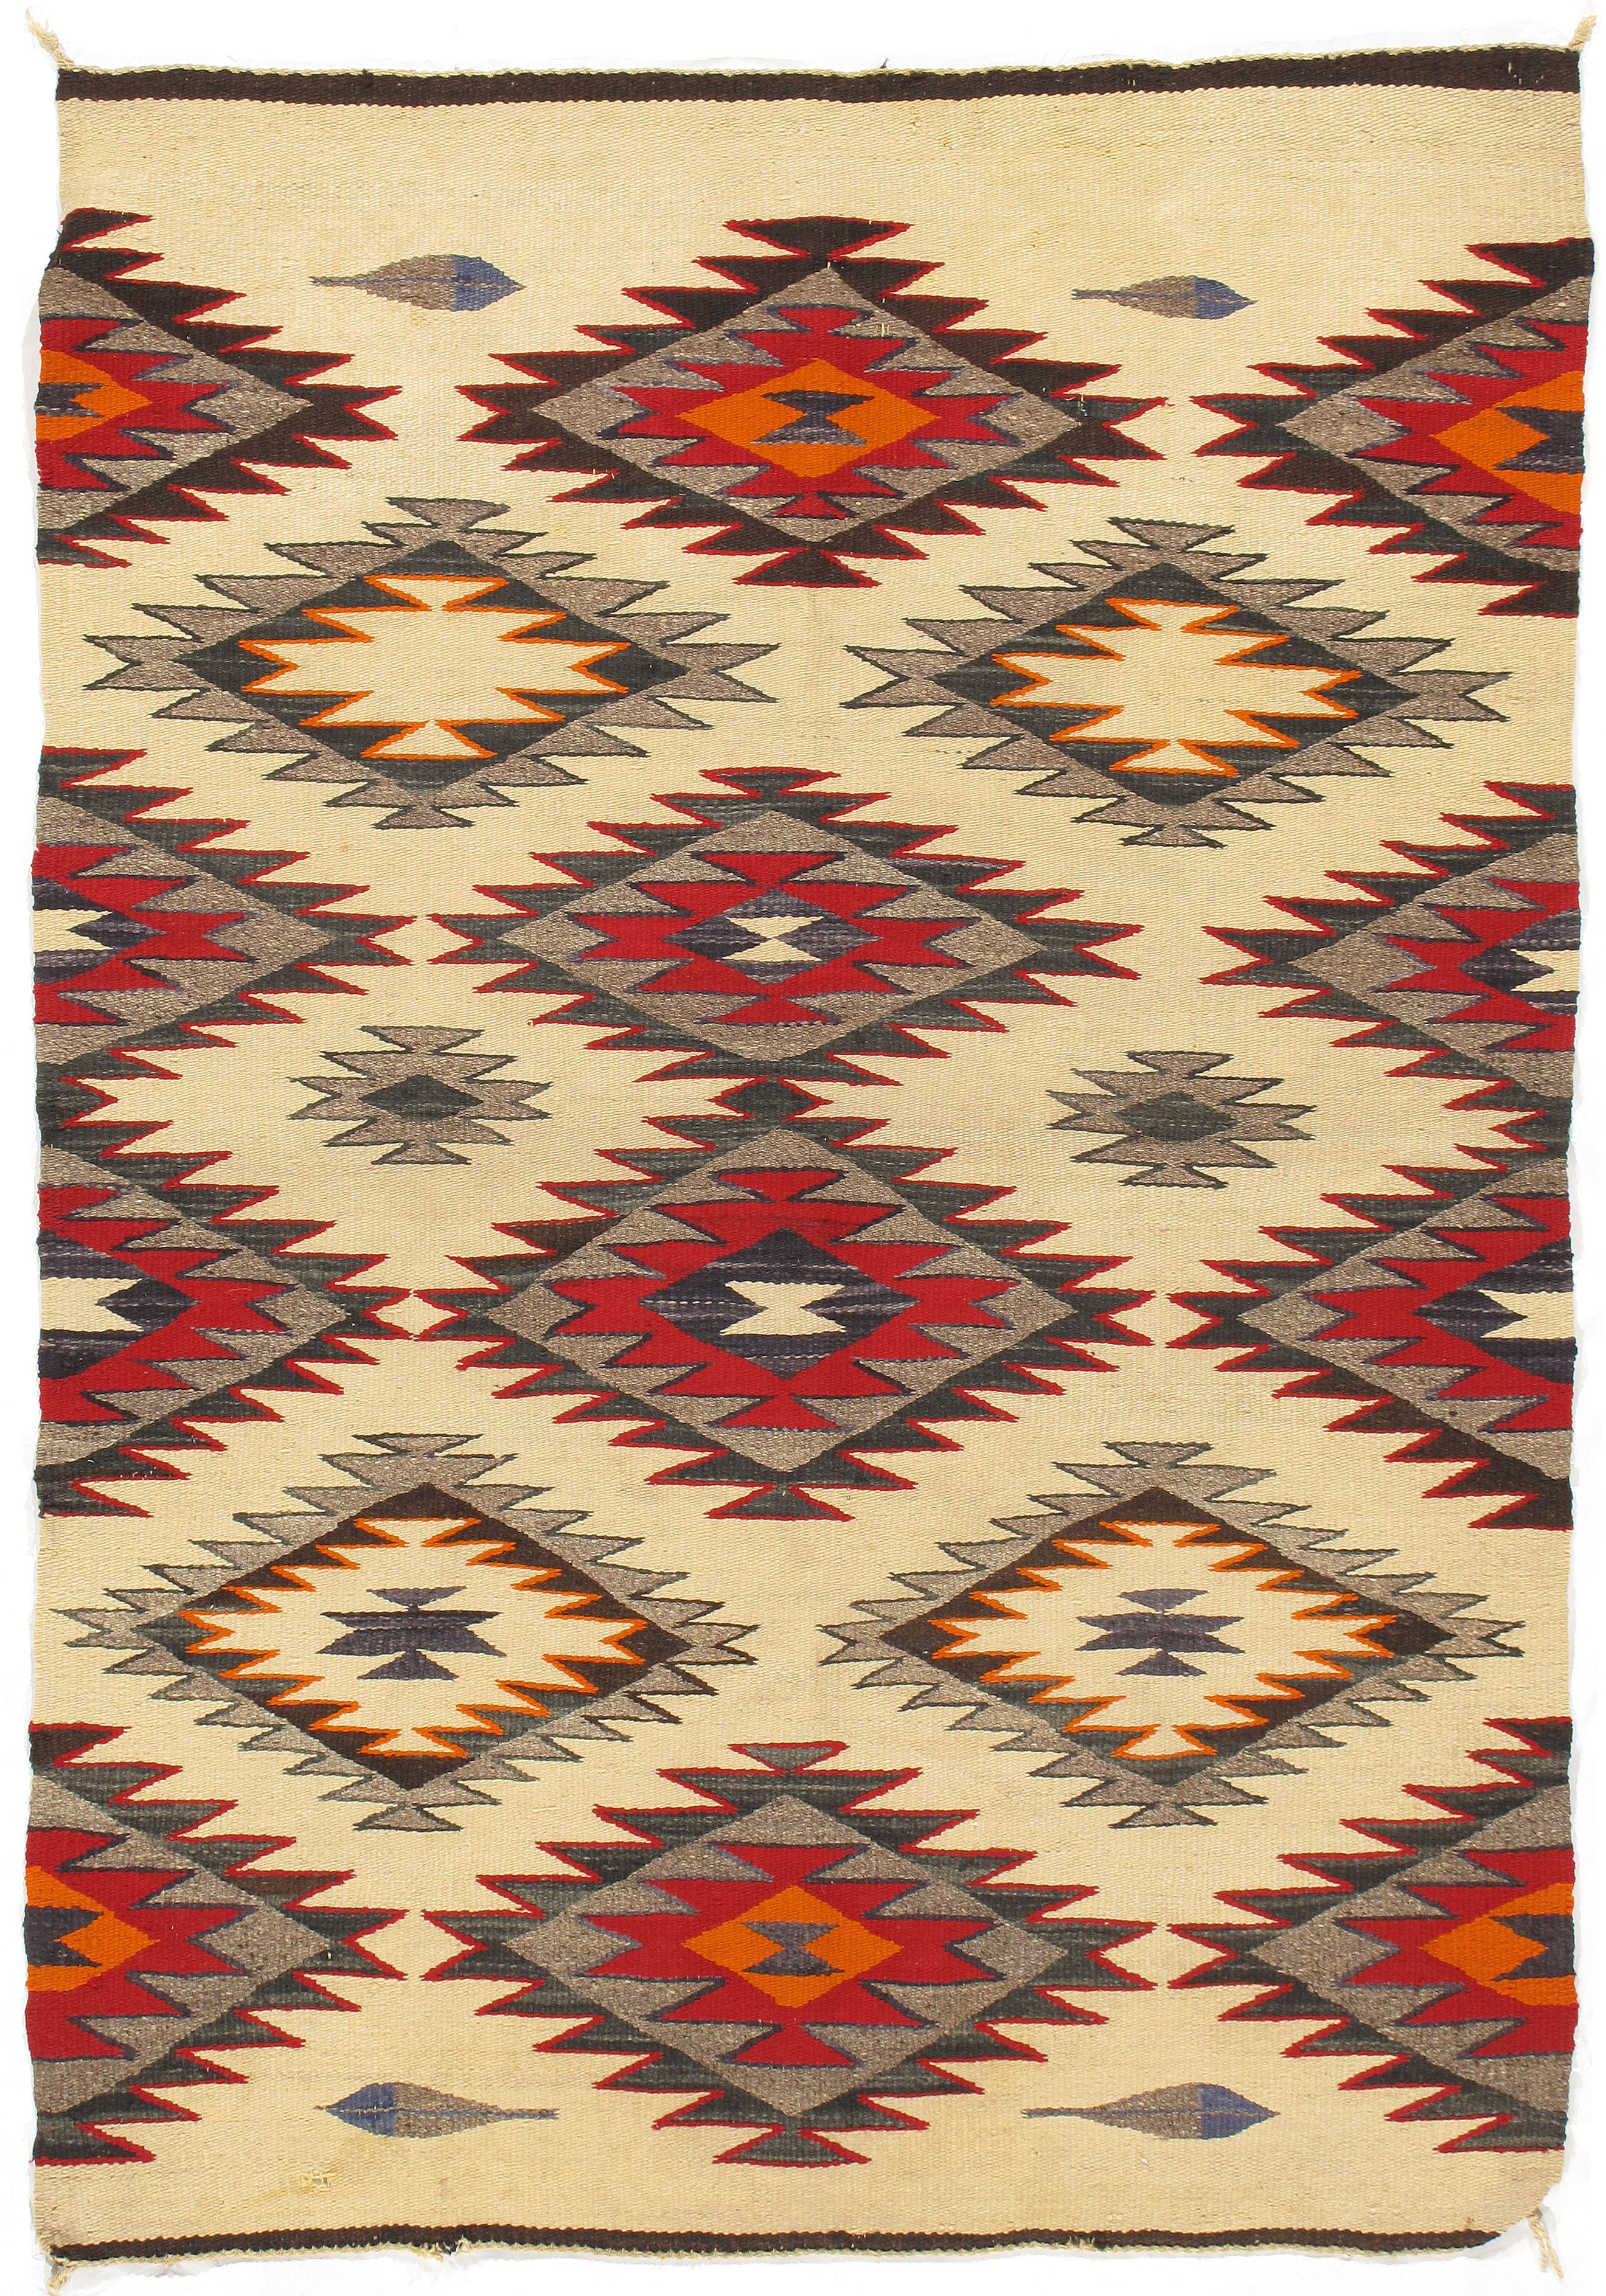 Native American Round Rugs